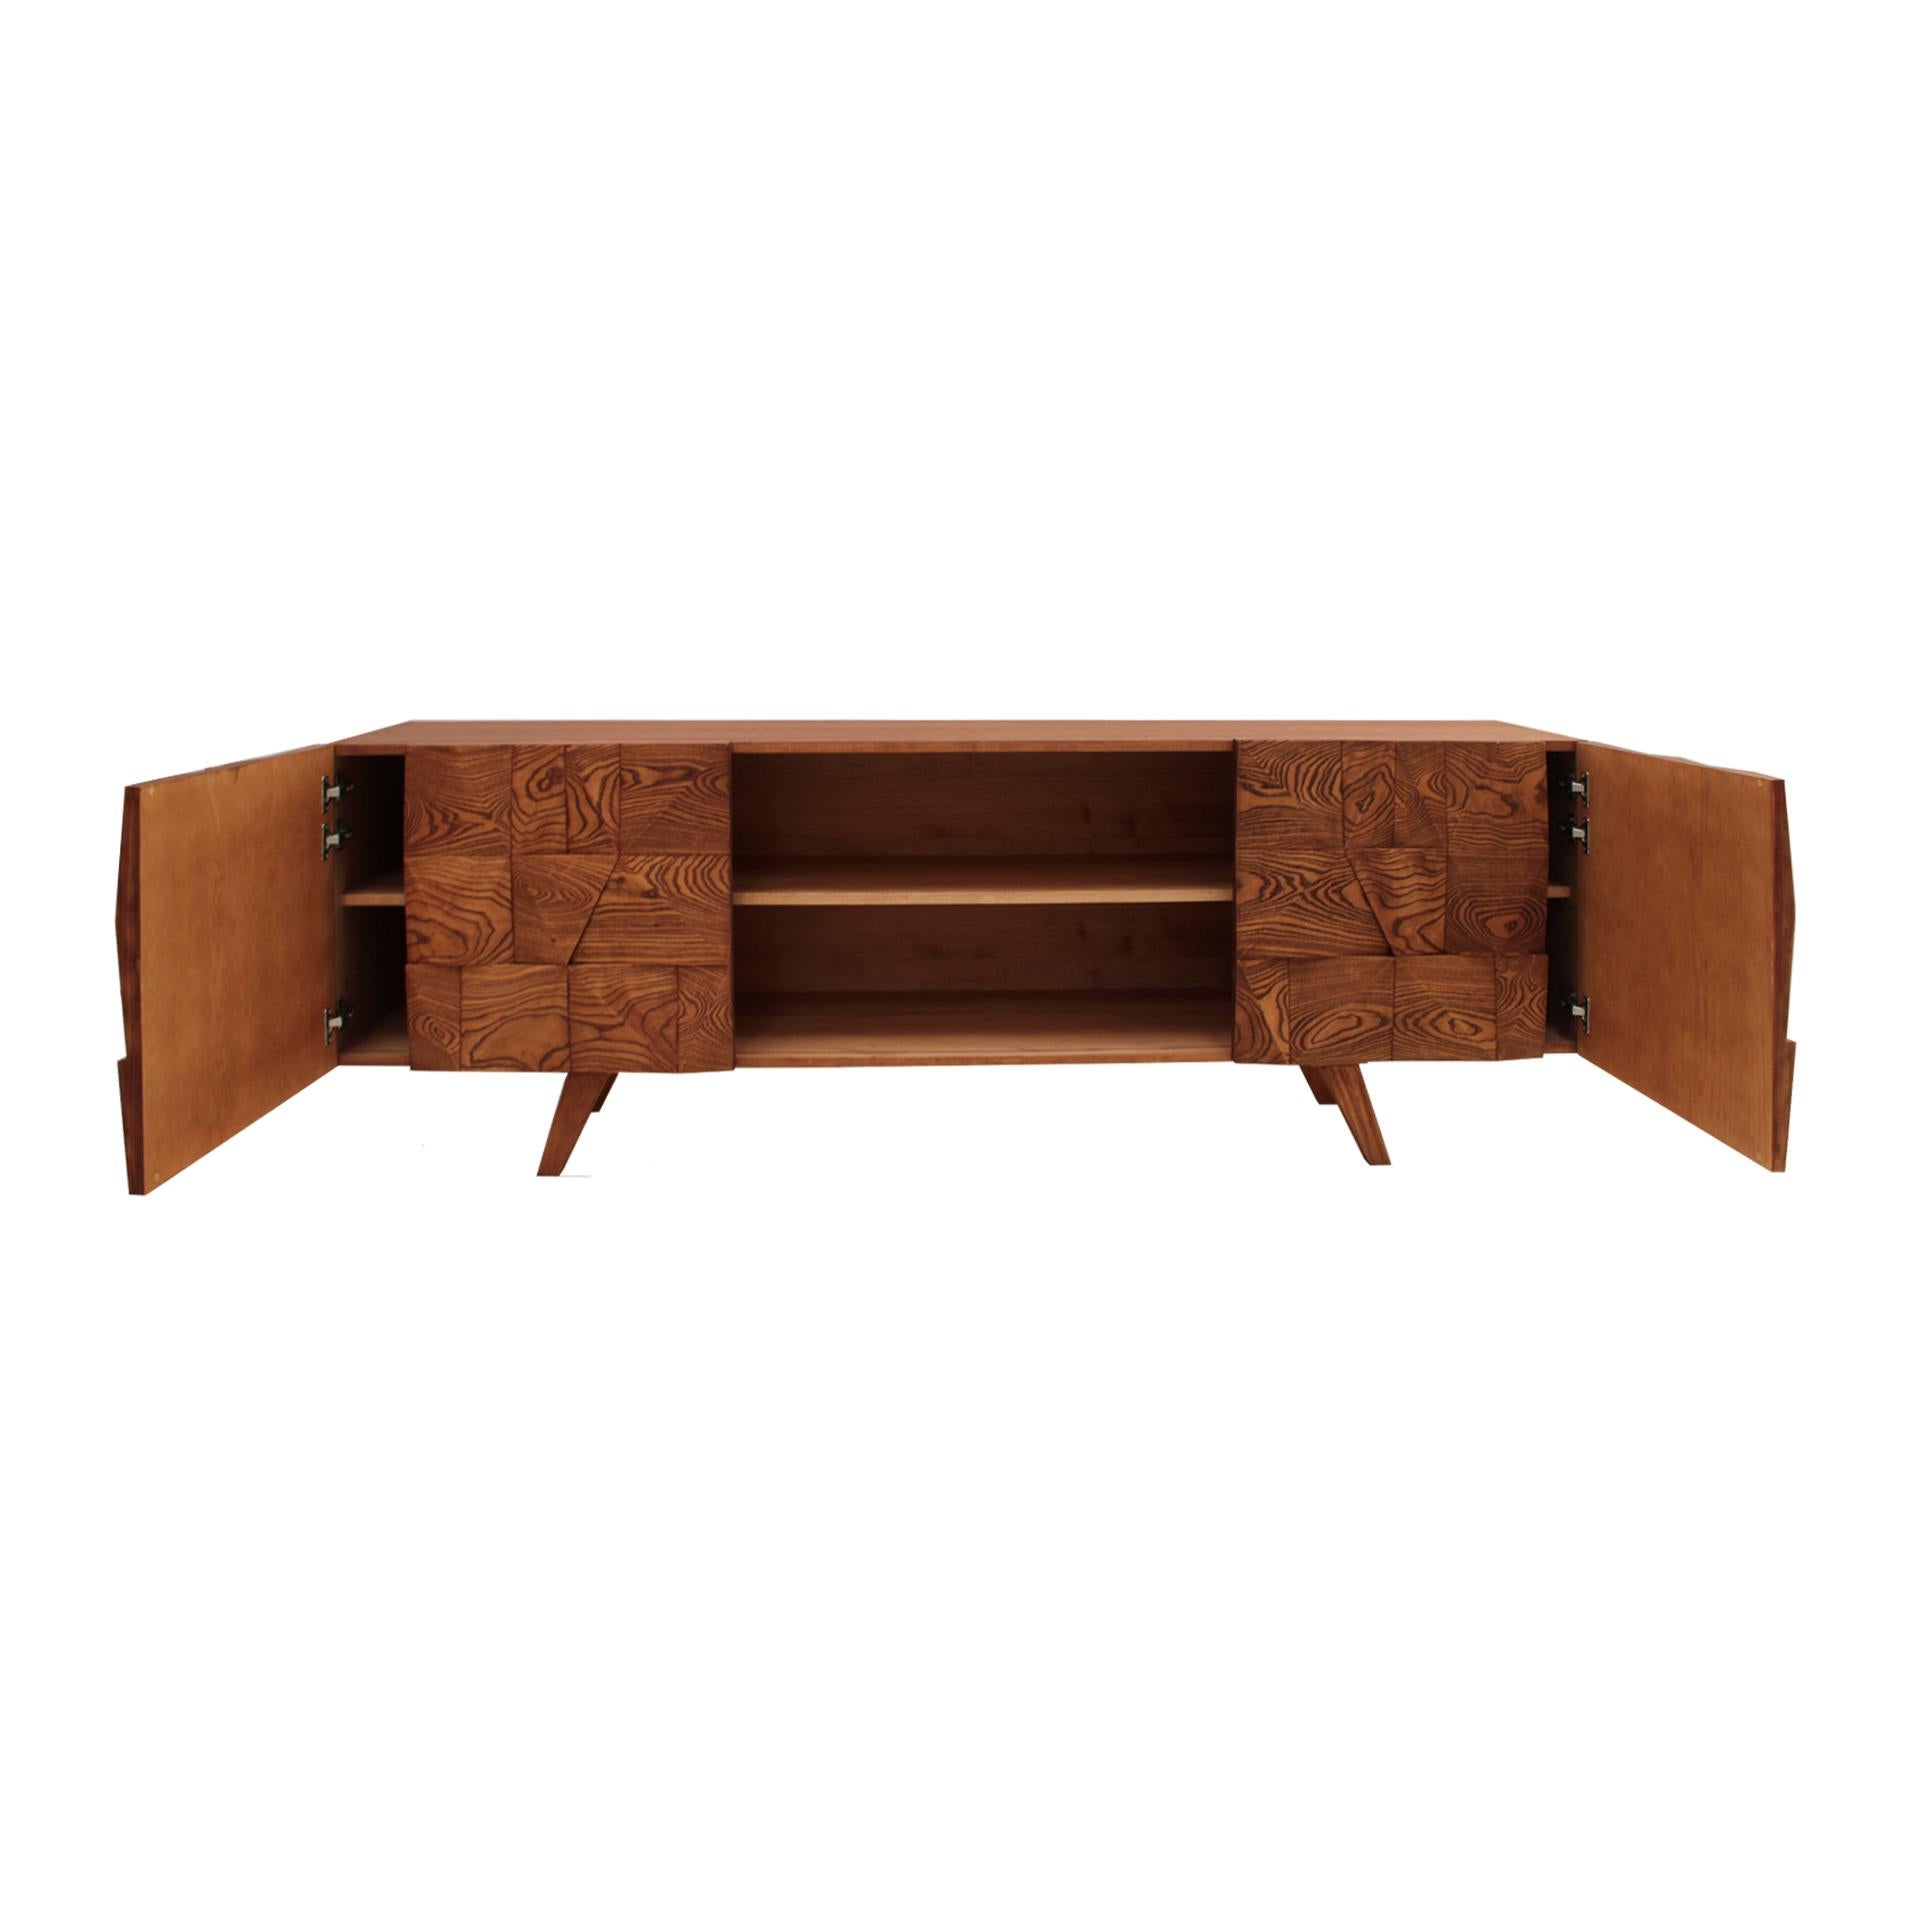 Contemporary Mid-Century Modern Style Solid Wood Italian Sideboard Designed by L.A. Studio For Sale